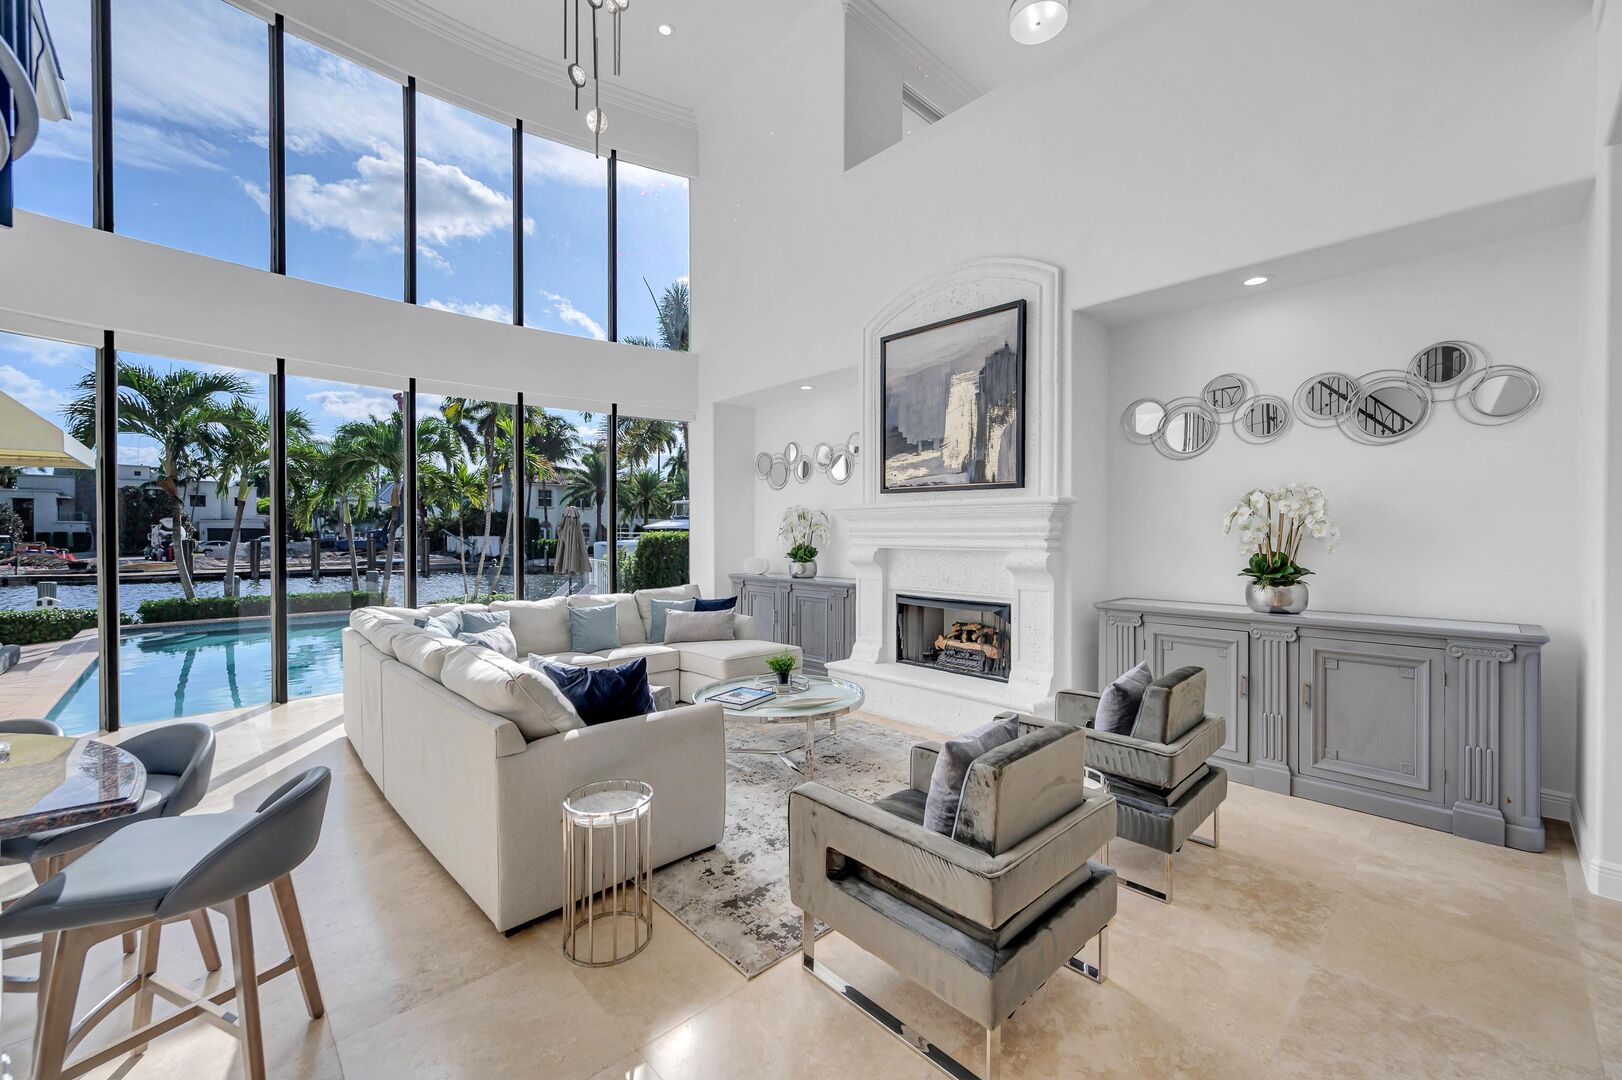 The living room offers a view of the waterfront and the heated swimming pool.